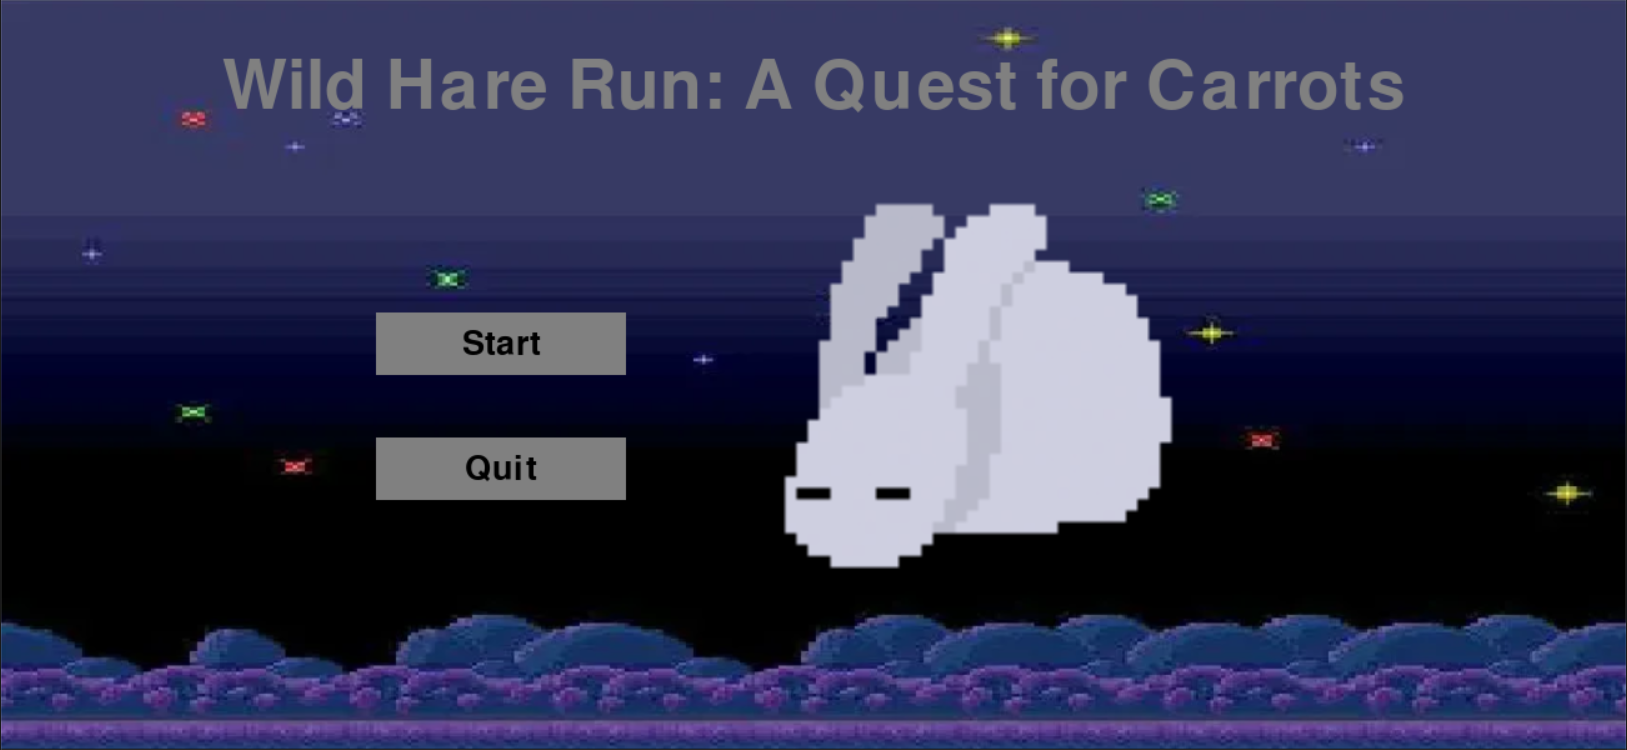 Wild Hare Run A Quest for Carrots